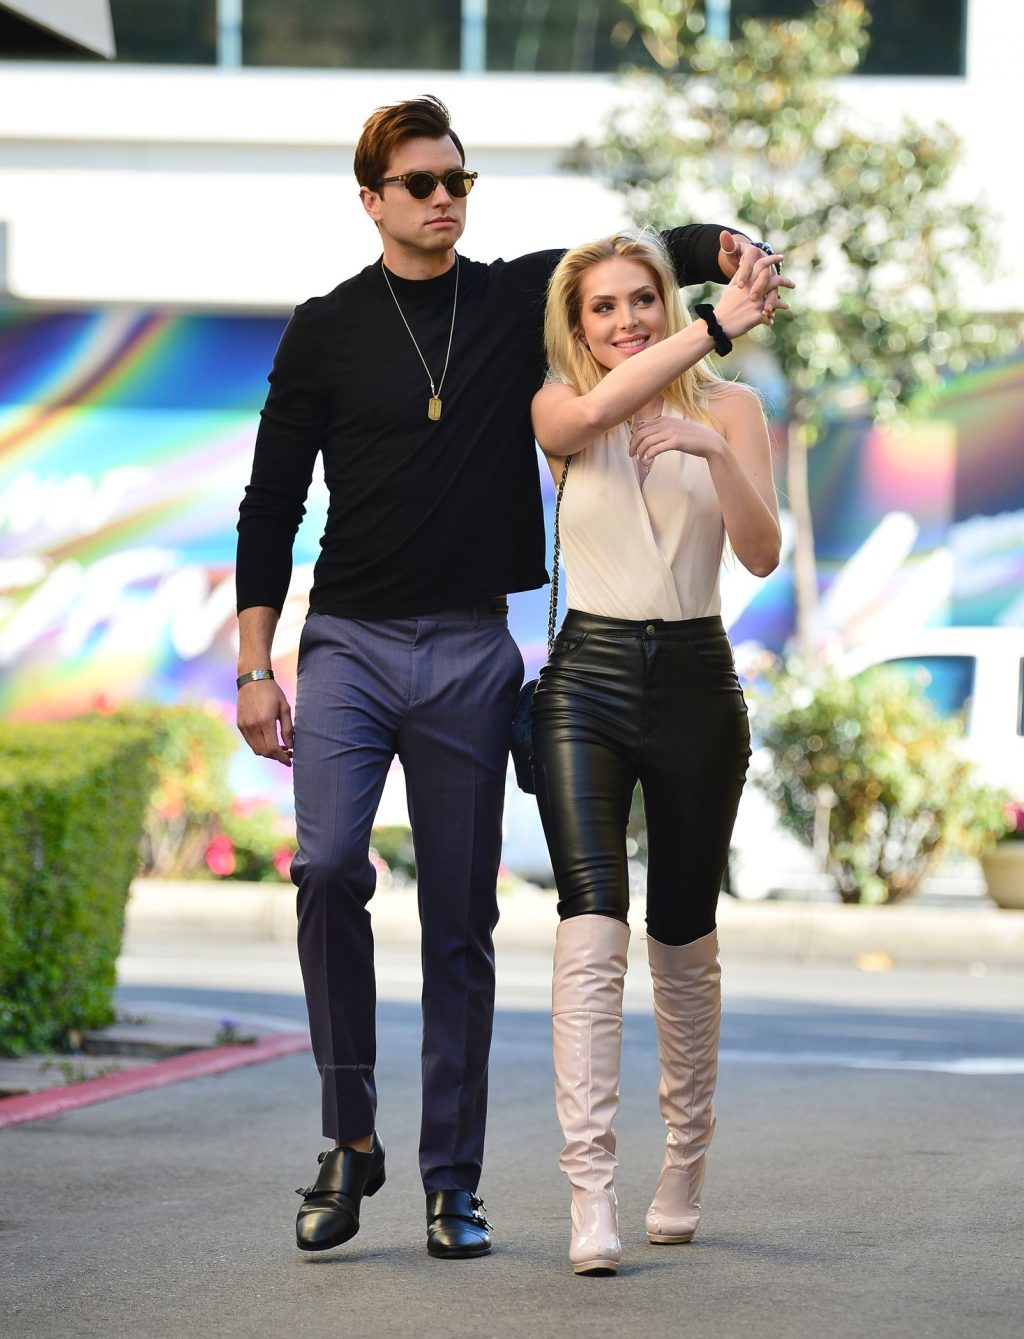 Saxon Sharbino &amp; Pierson Fodé Pack on the PDA After a Romantic lunch in LA (15 Photos)